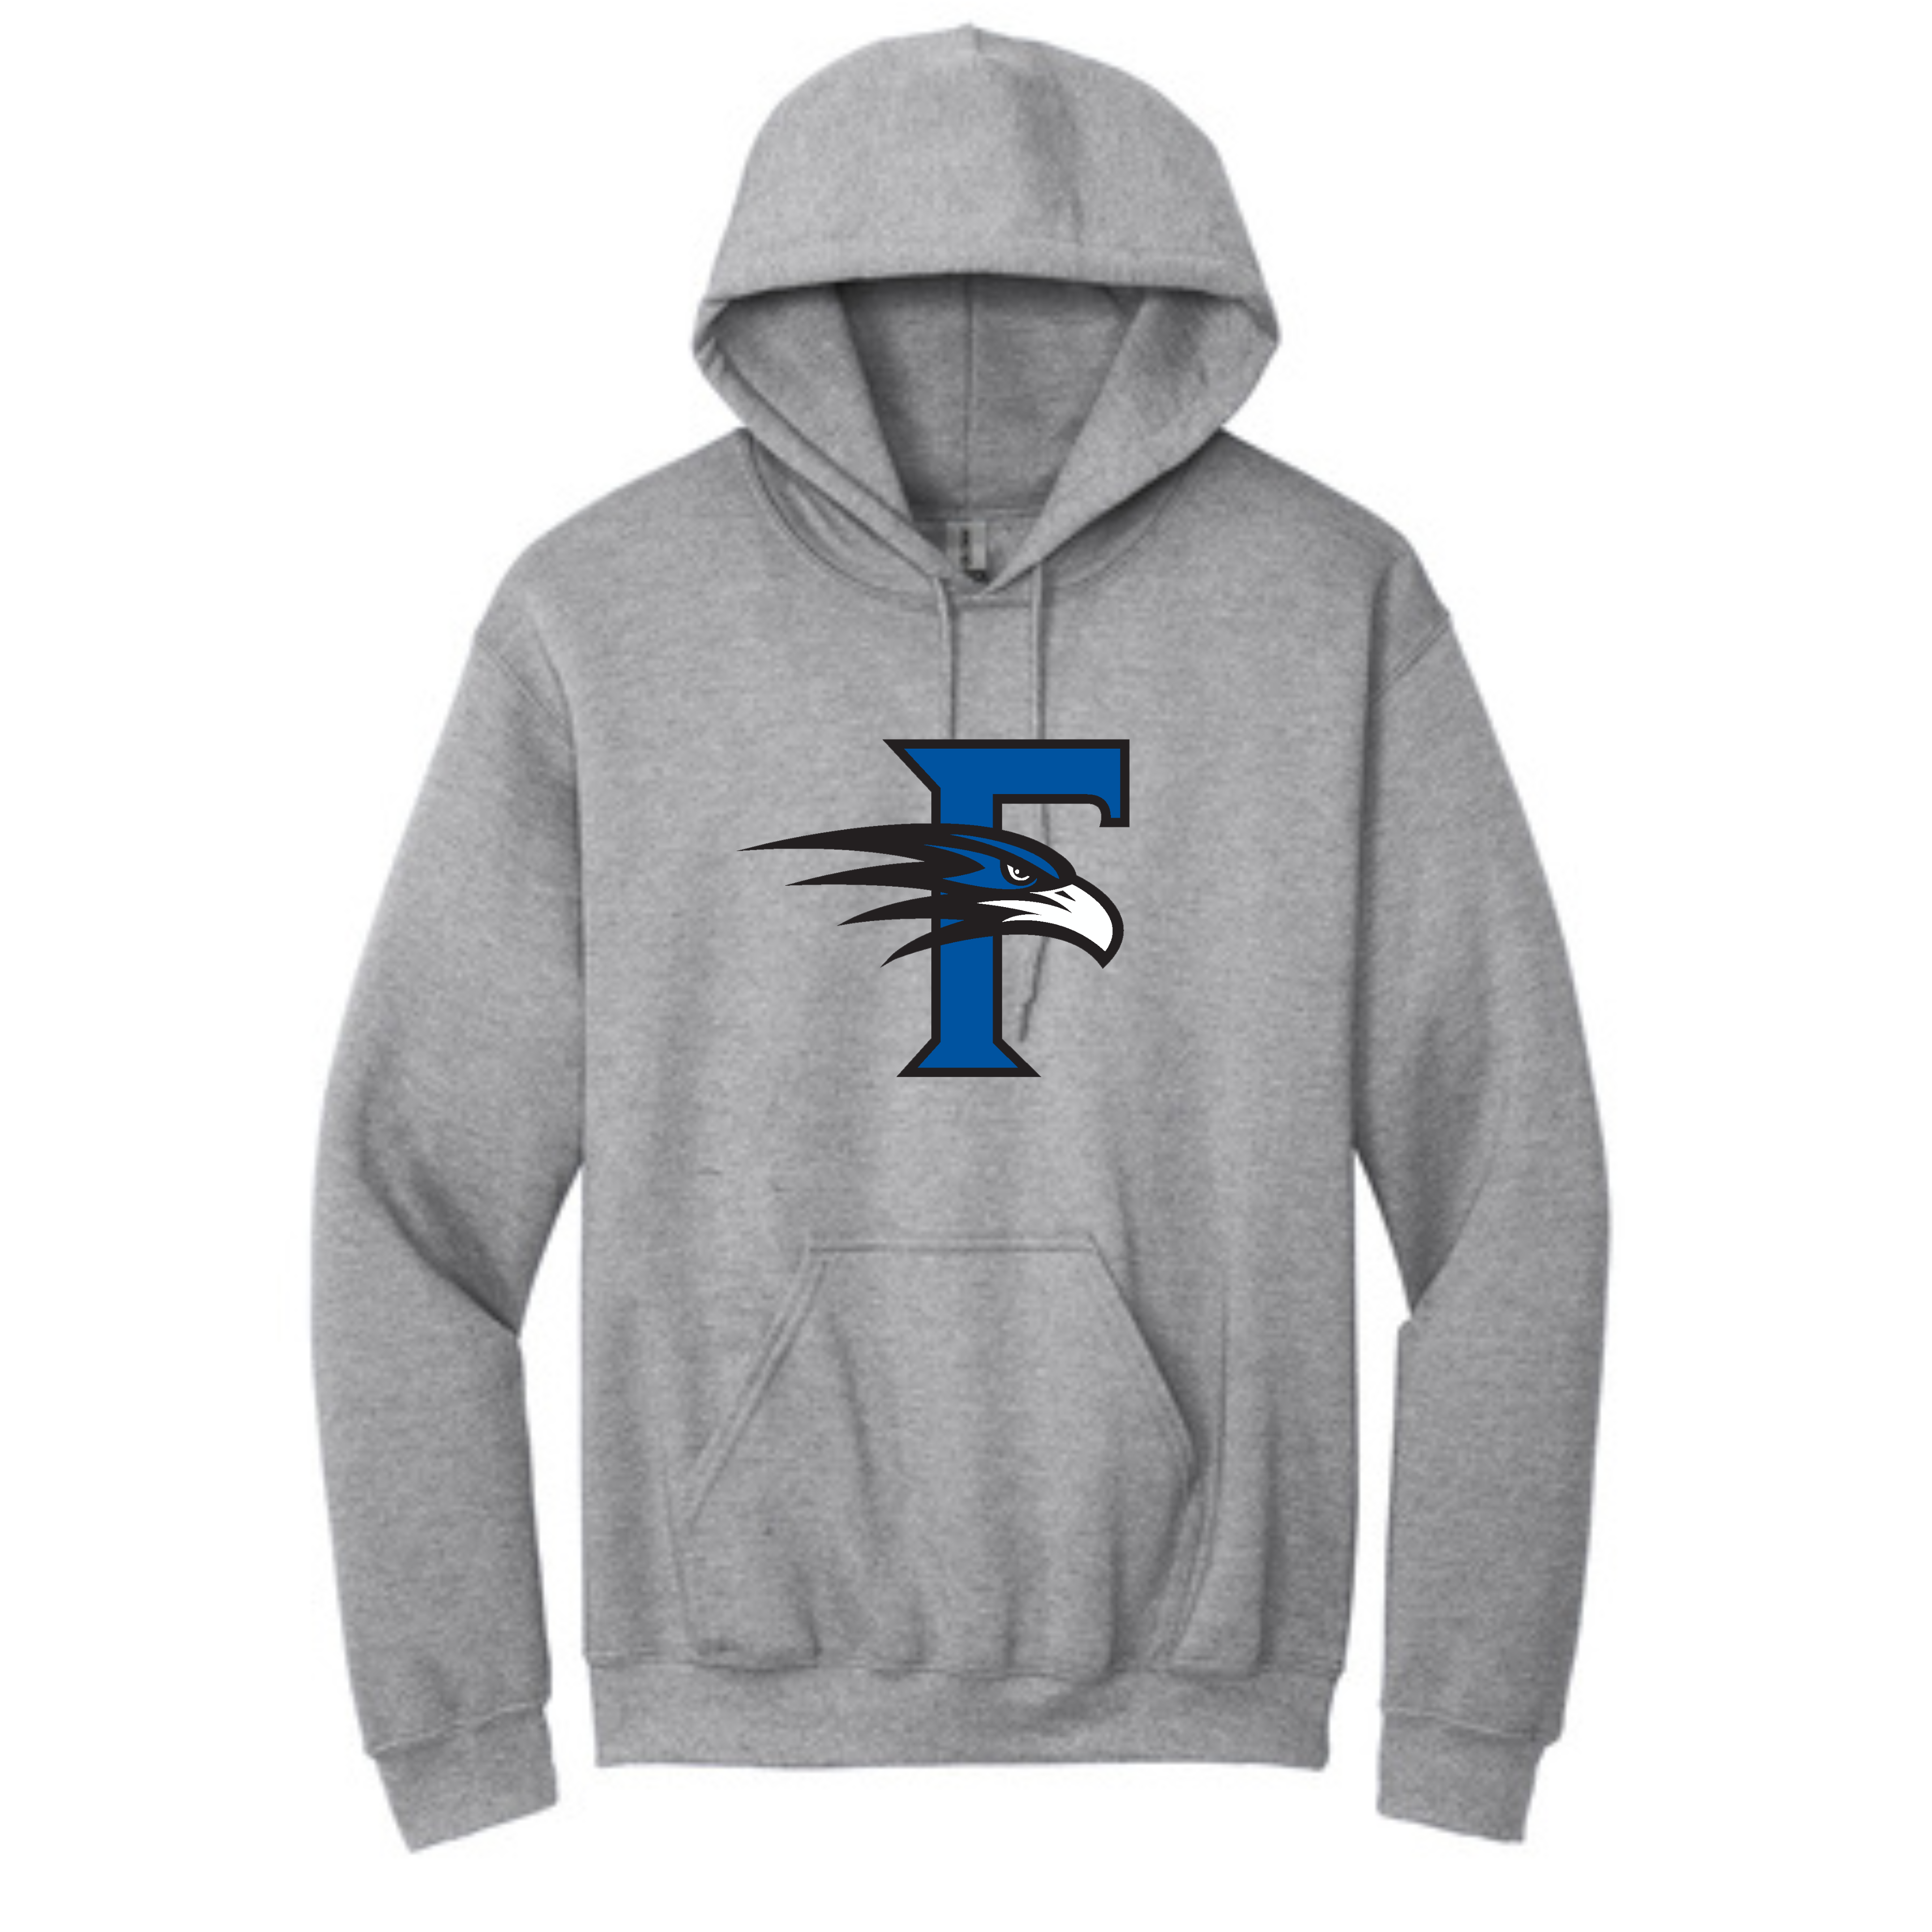 Florence Falcons Hoodie- 18500